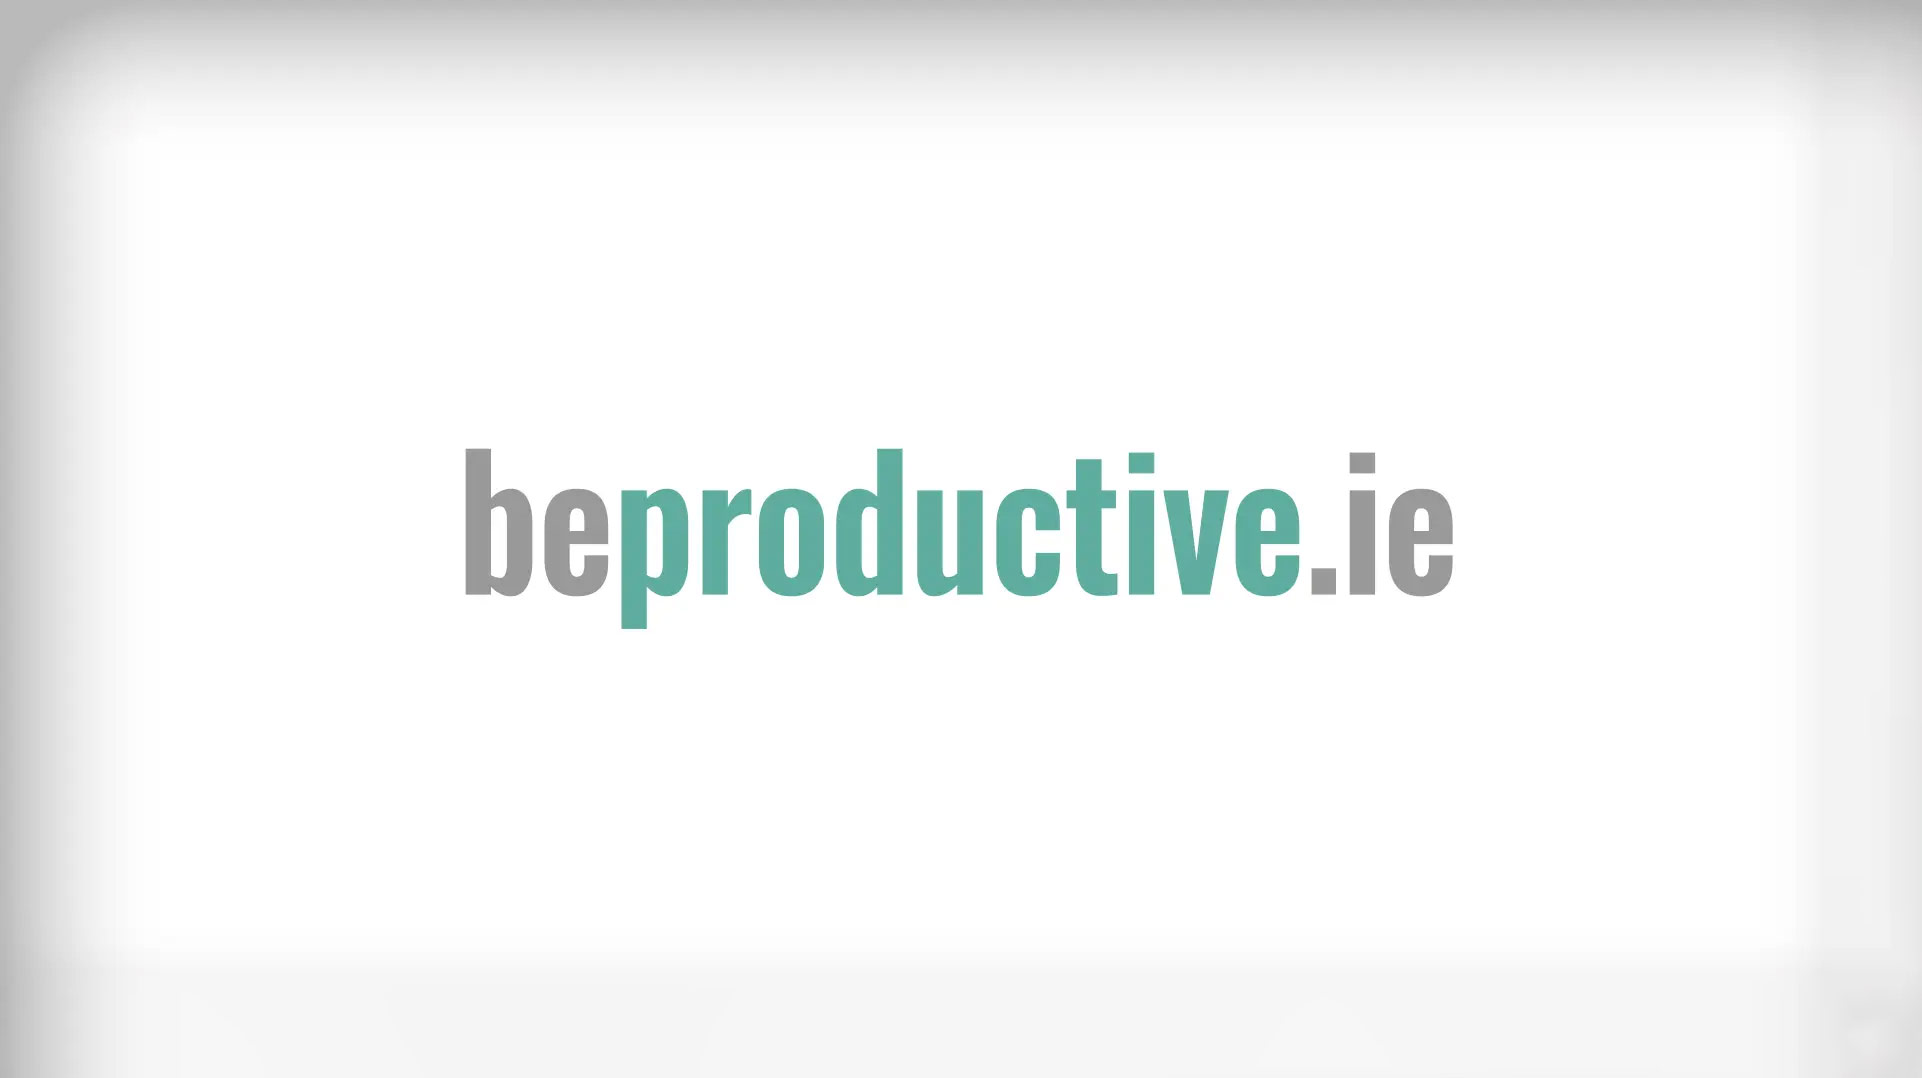 Be Productive.ie